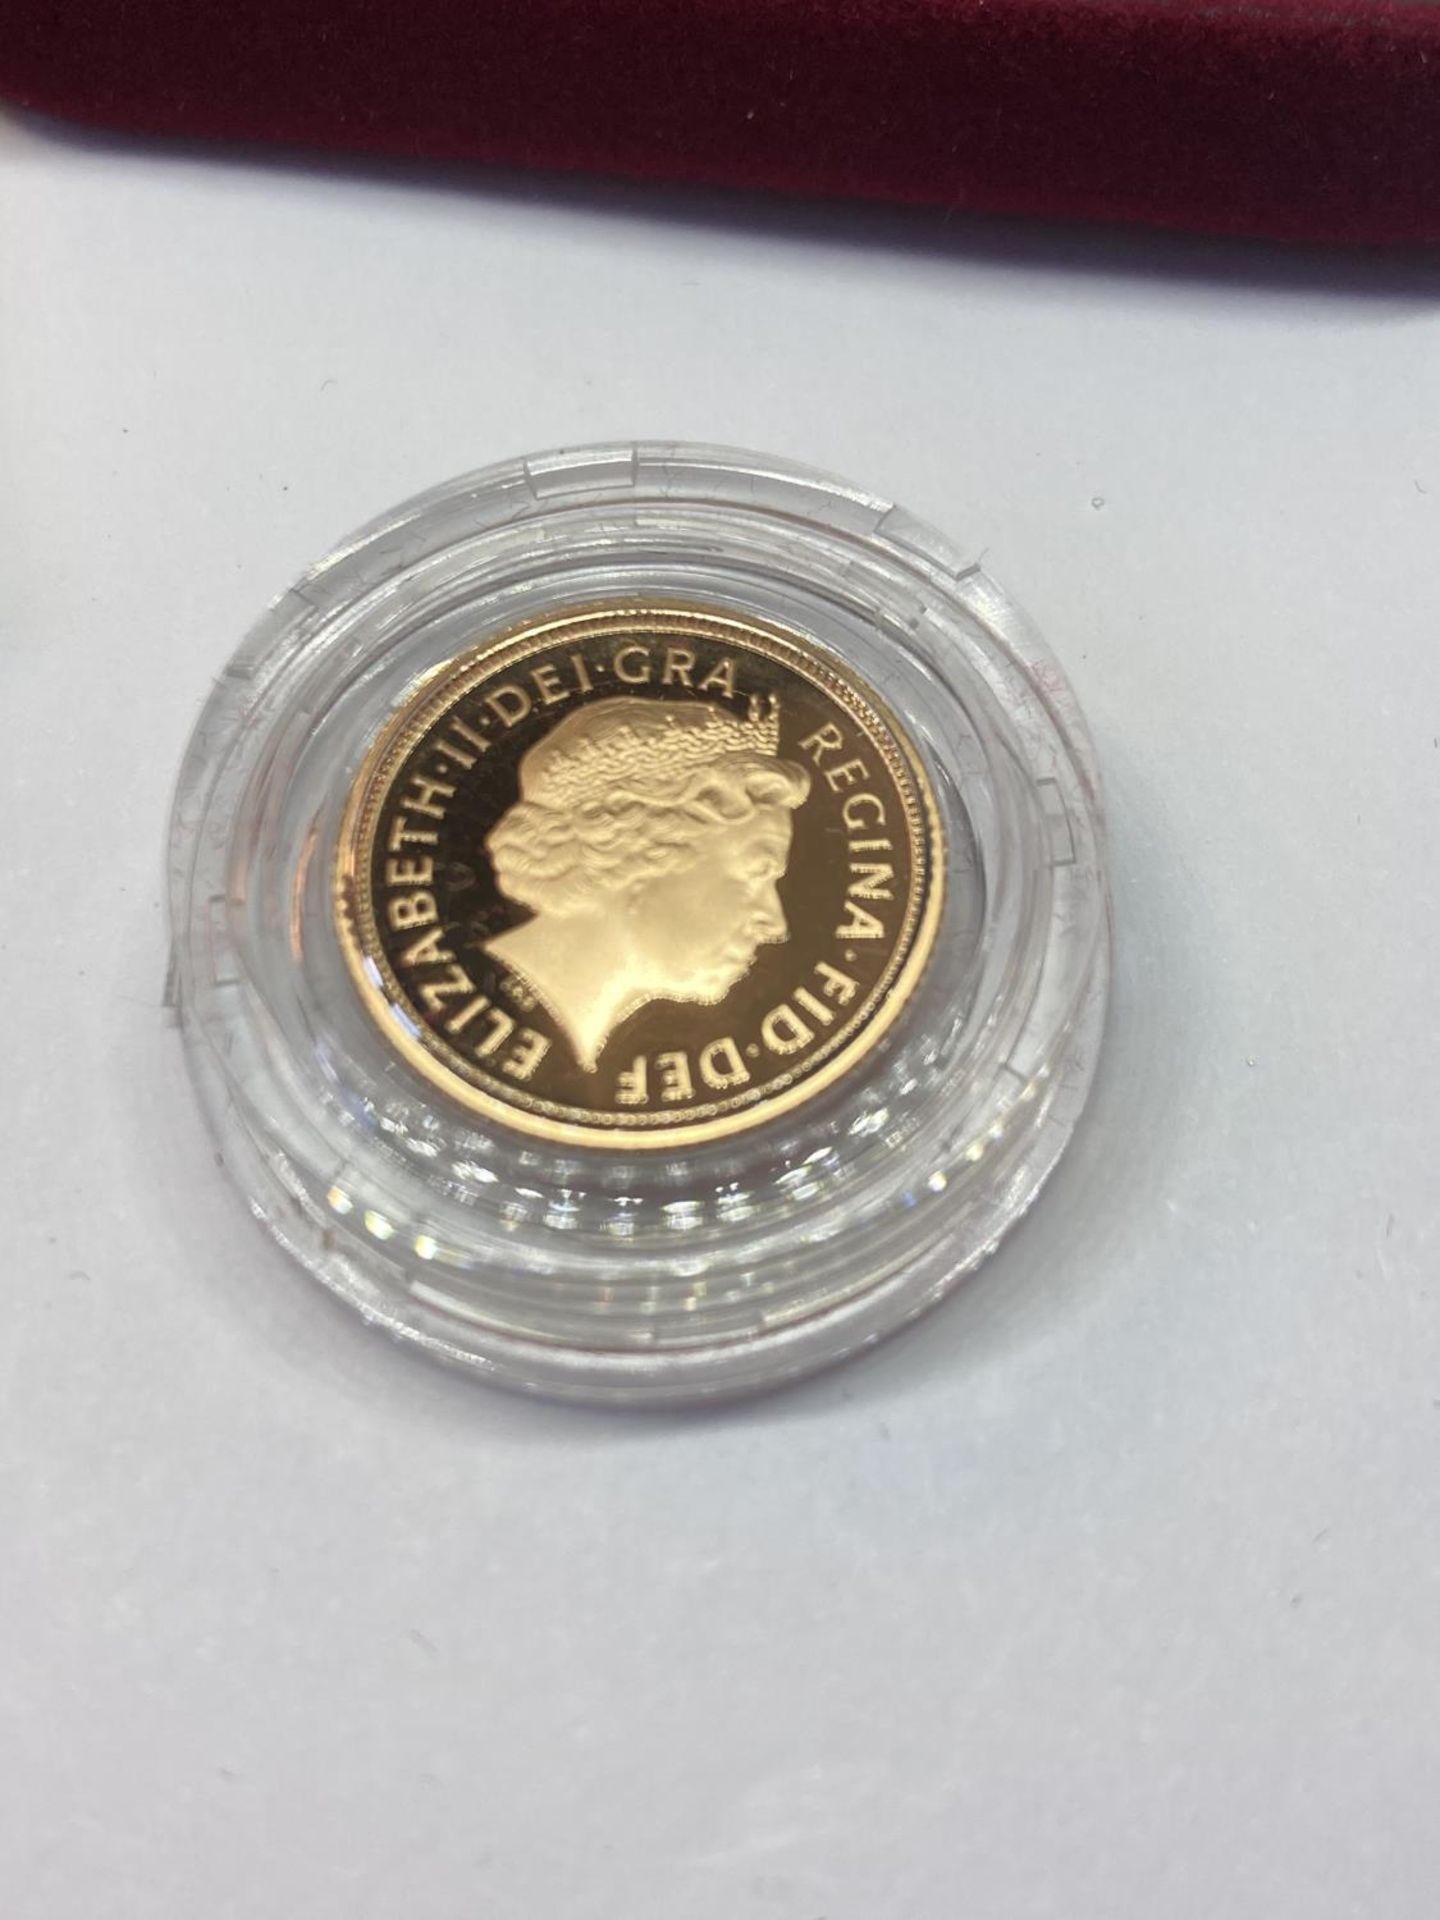 A 2003 GOLD PROOF HALF SOVEREIGN NO 03411 OF 10,000 IN A PRESENTATION BOX WITH CERTIFICATE OF - Image 3 of 5